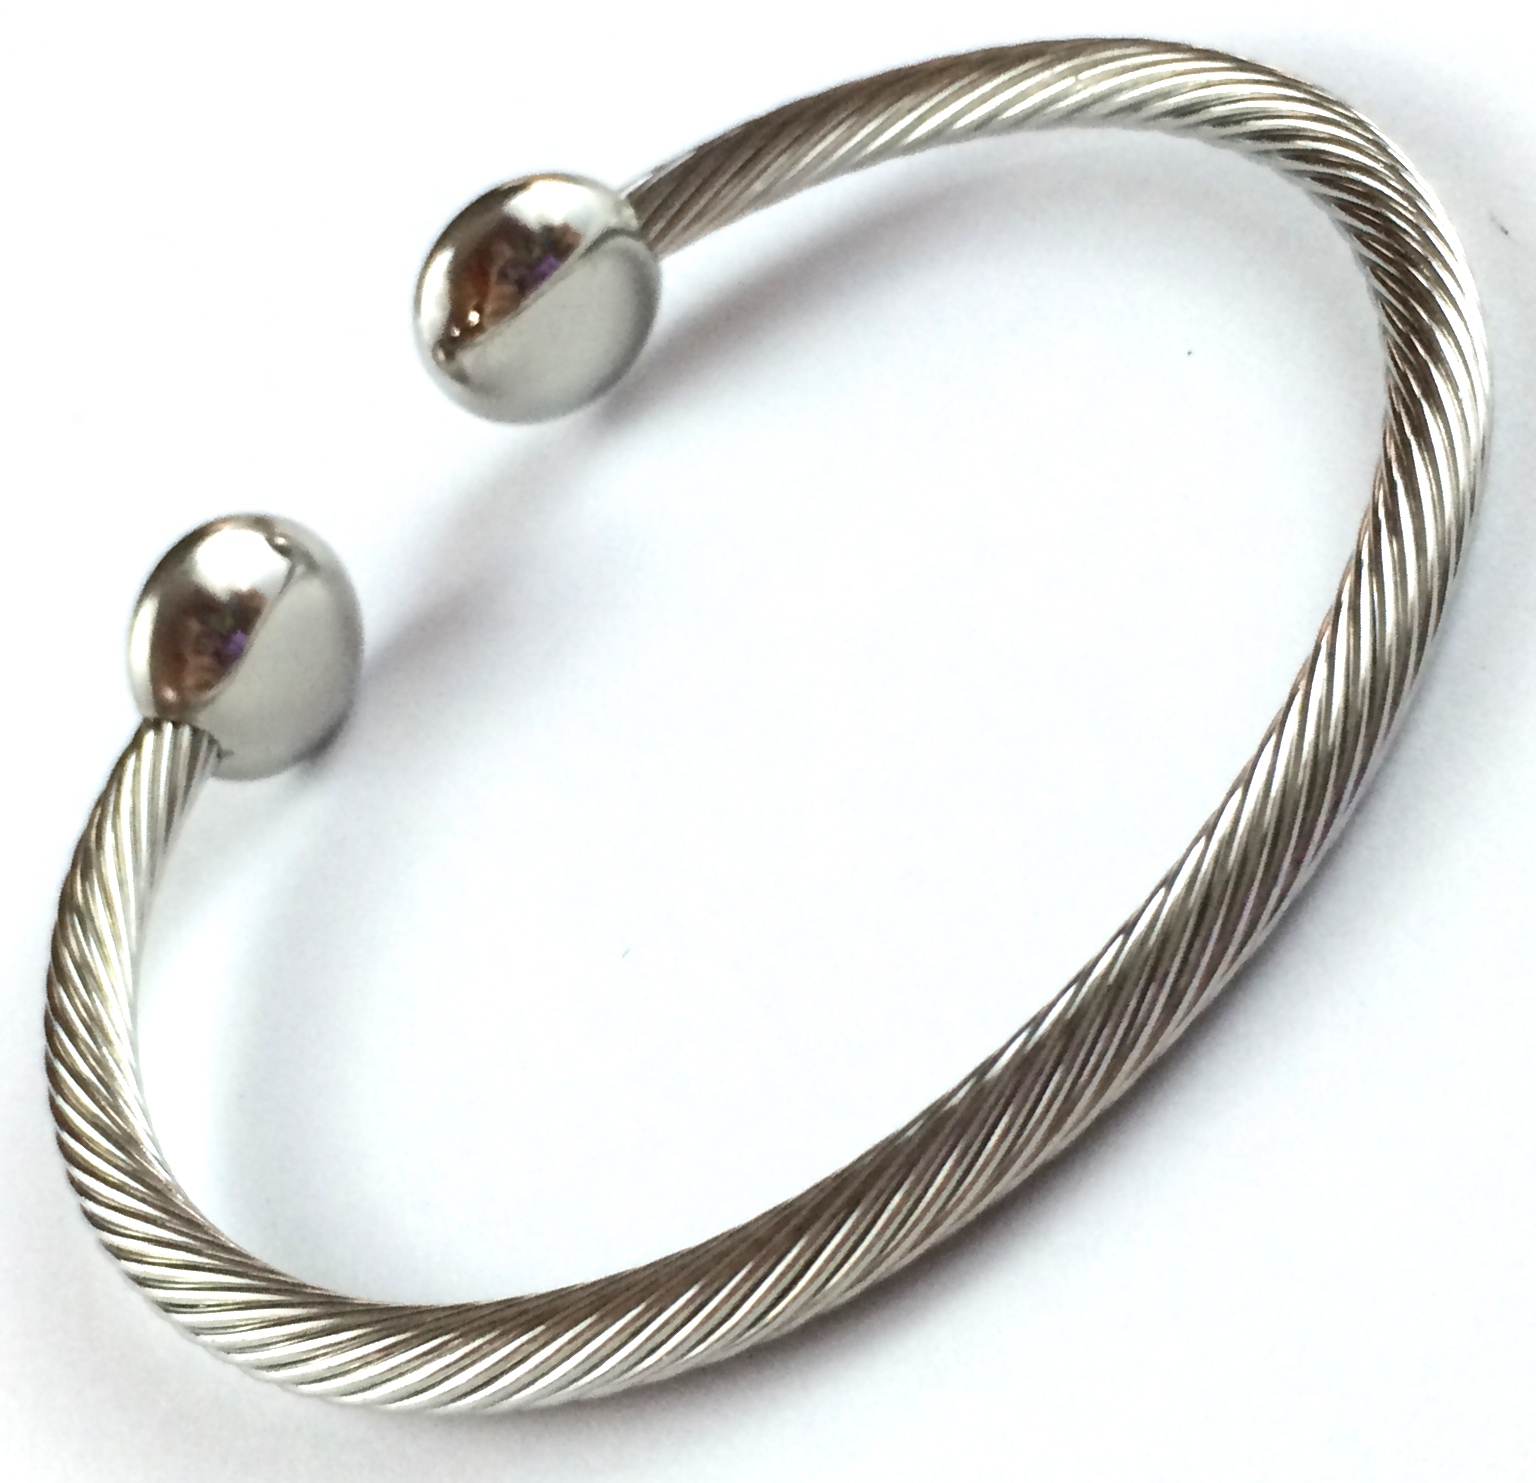 HowTheBandWorks.com – Stainless Cable Bangle w/ Silver Ends